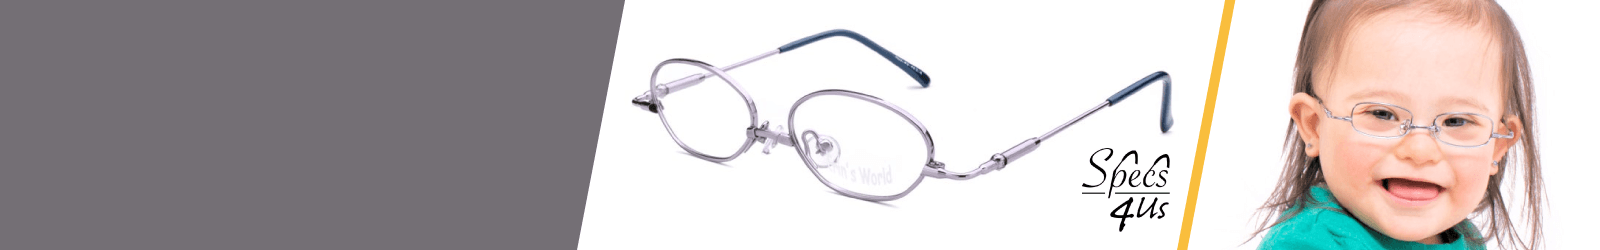 White Specs4us Eyewear for Kids from 2 to 4-year-old